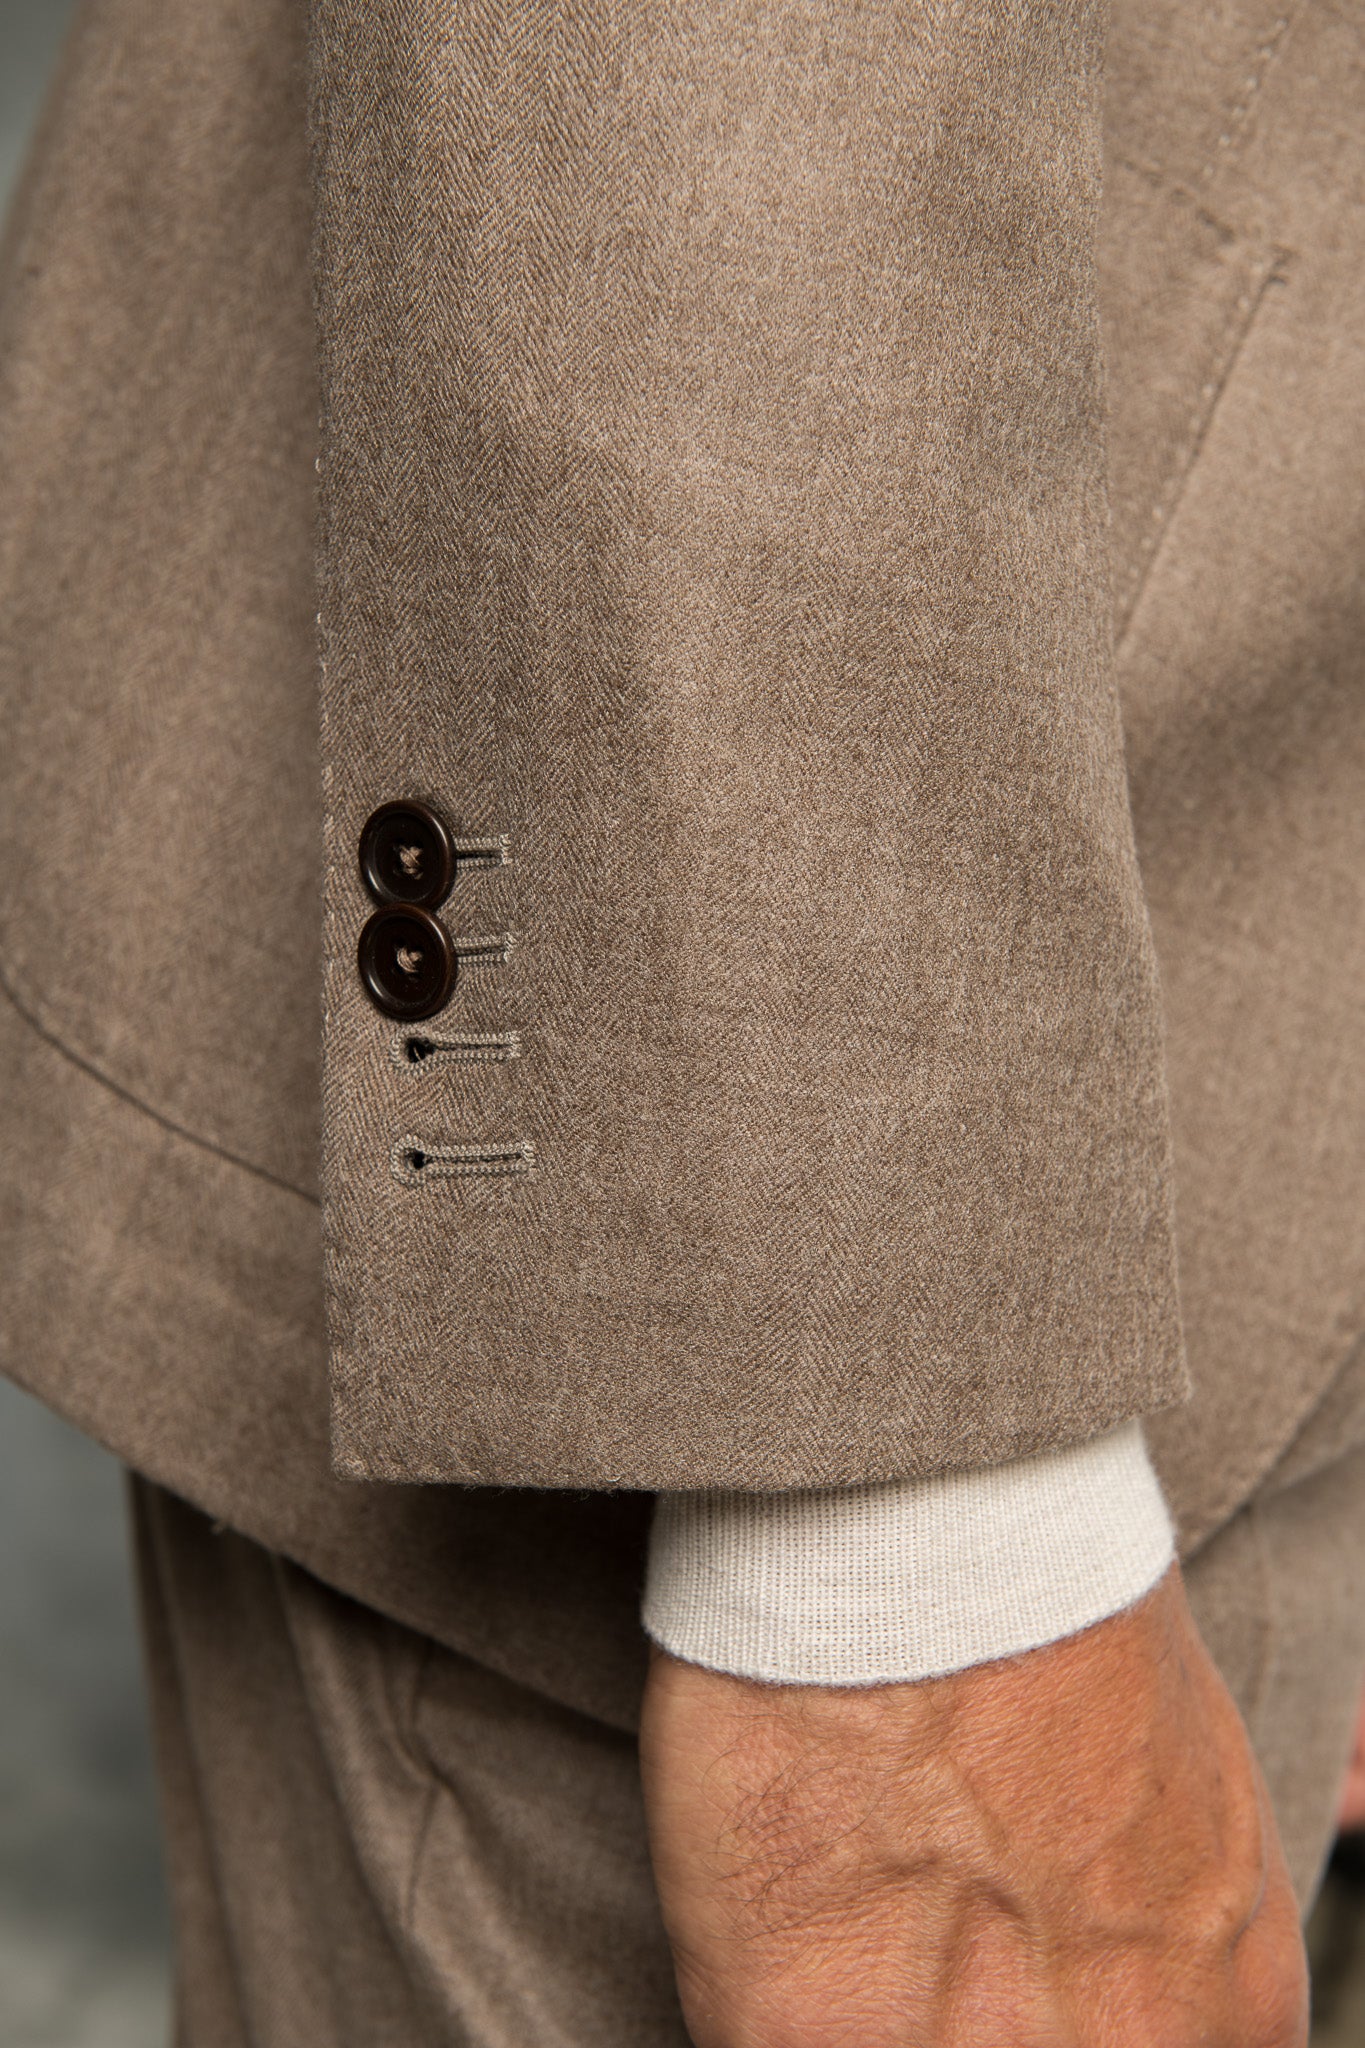 Taupe suit in LORO PIANA Pecora Nera® wool –  Made in Italy